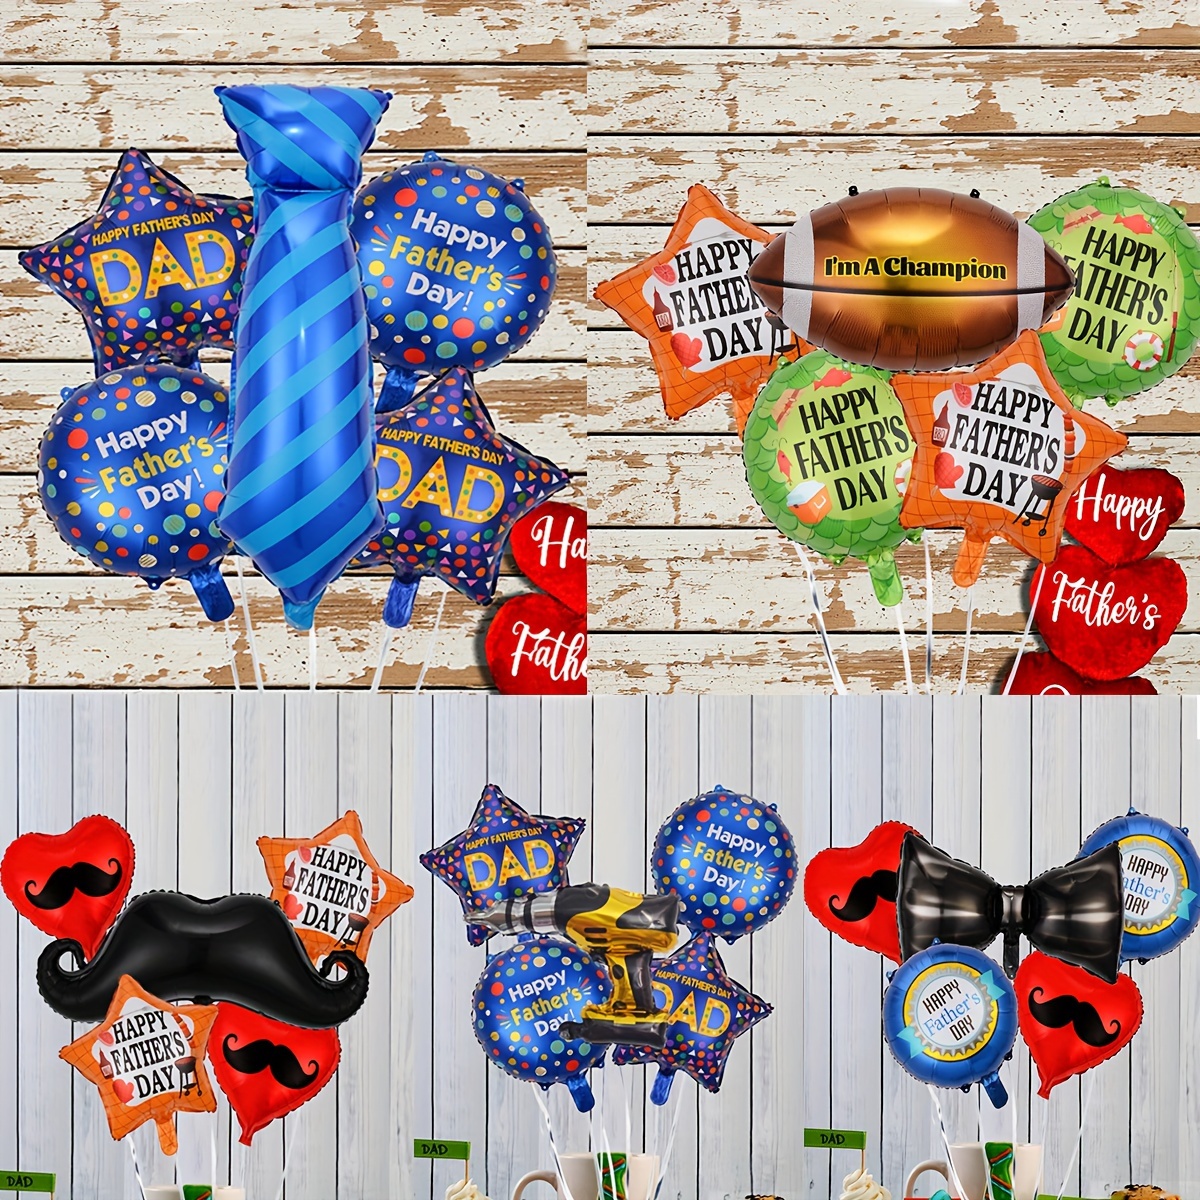 

5-piece Father's Day Celebration Balloon Set - Includes Bowtie & Beard Designs, Self-sealing Aluminum Foil, Perfect For Parties & Home Decor Transform Your Space Into A Dad-approved Zone